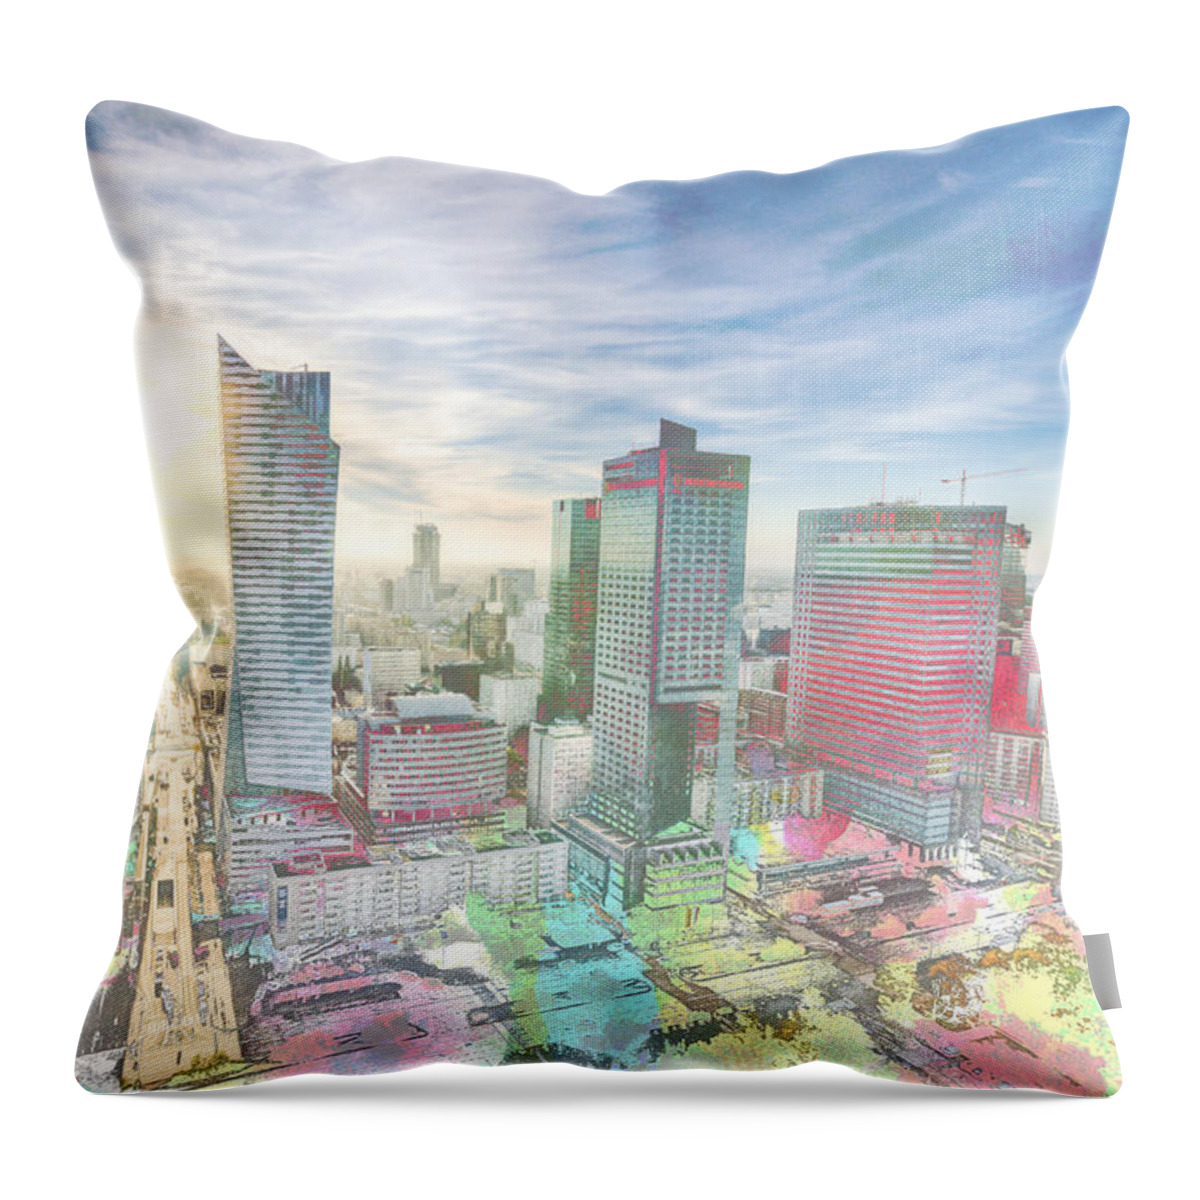 Warsaw Throw Pillow featuring the digital art Skyline of Warsaw Poland by Anthony Murphy